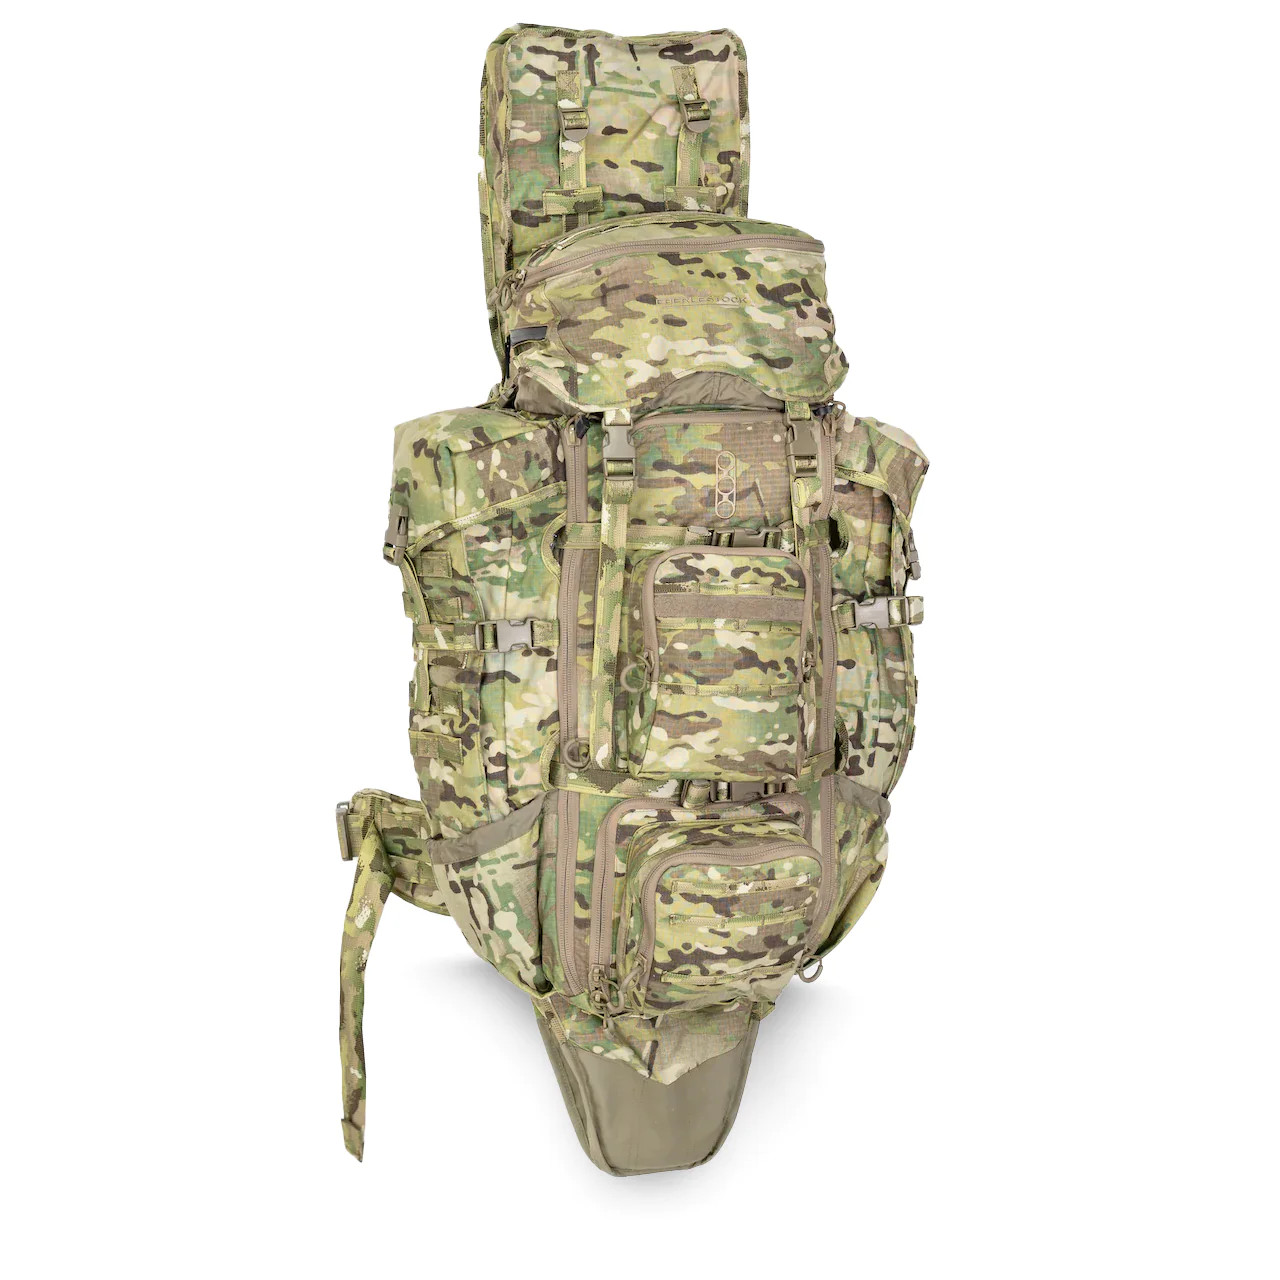 Eberlestock G4 Operator Backpack buy with delivery to the USA 